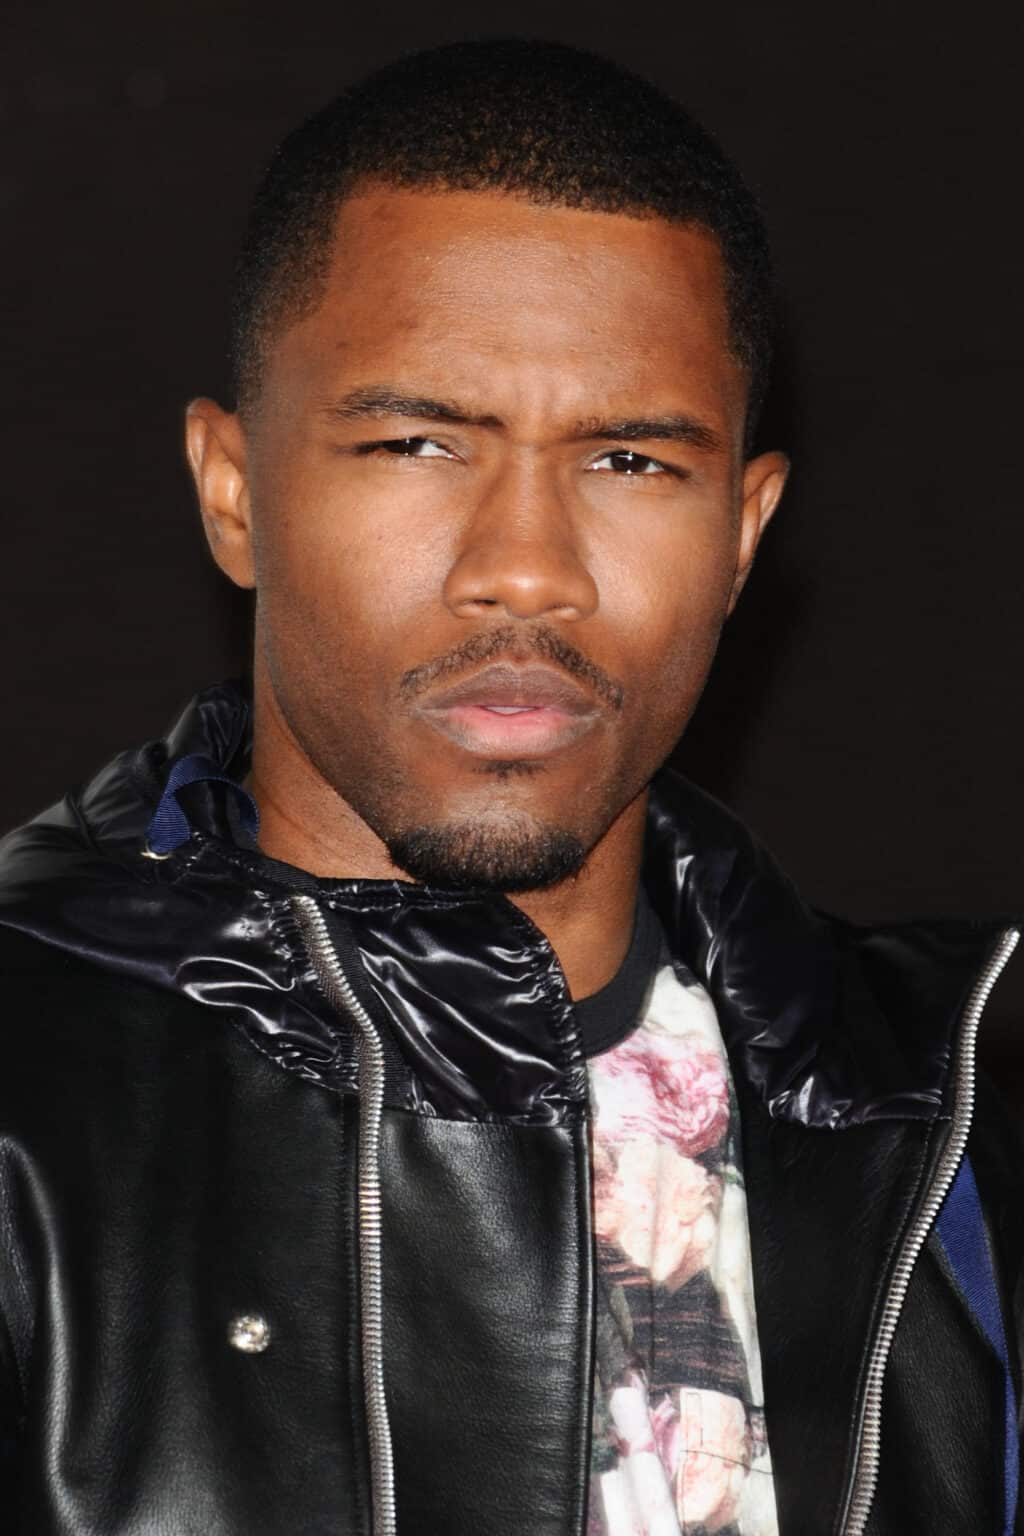 What Personality Type Is Frank Ocean?